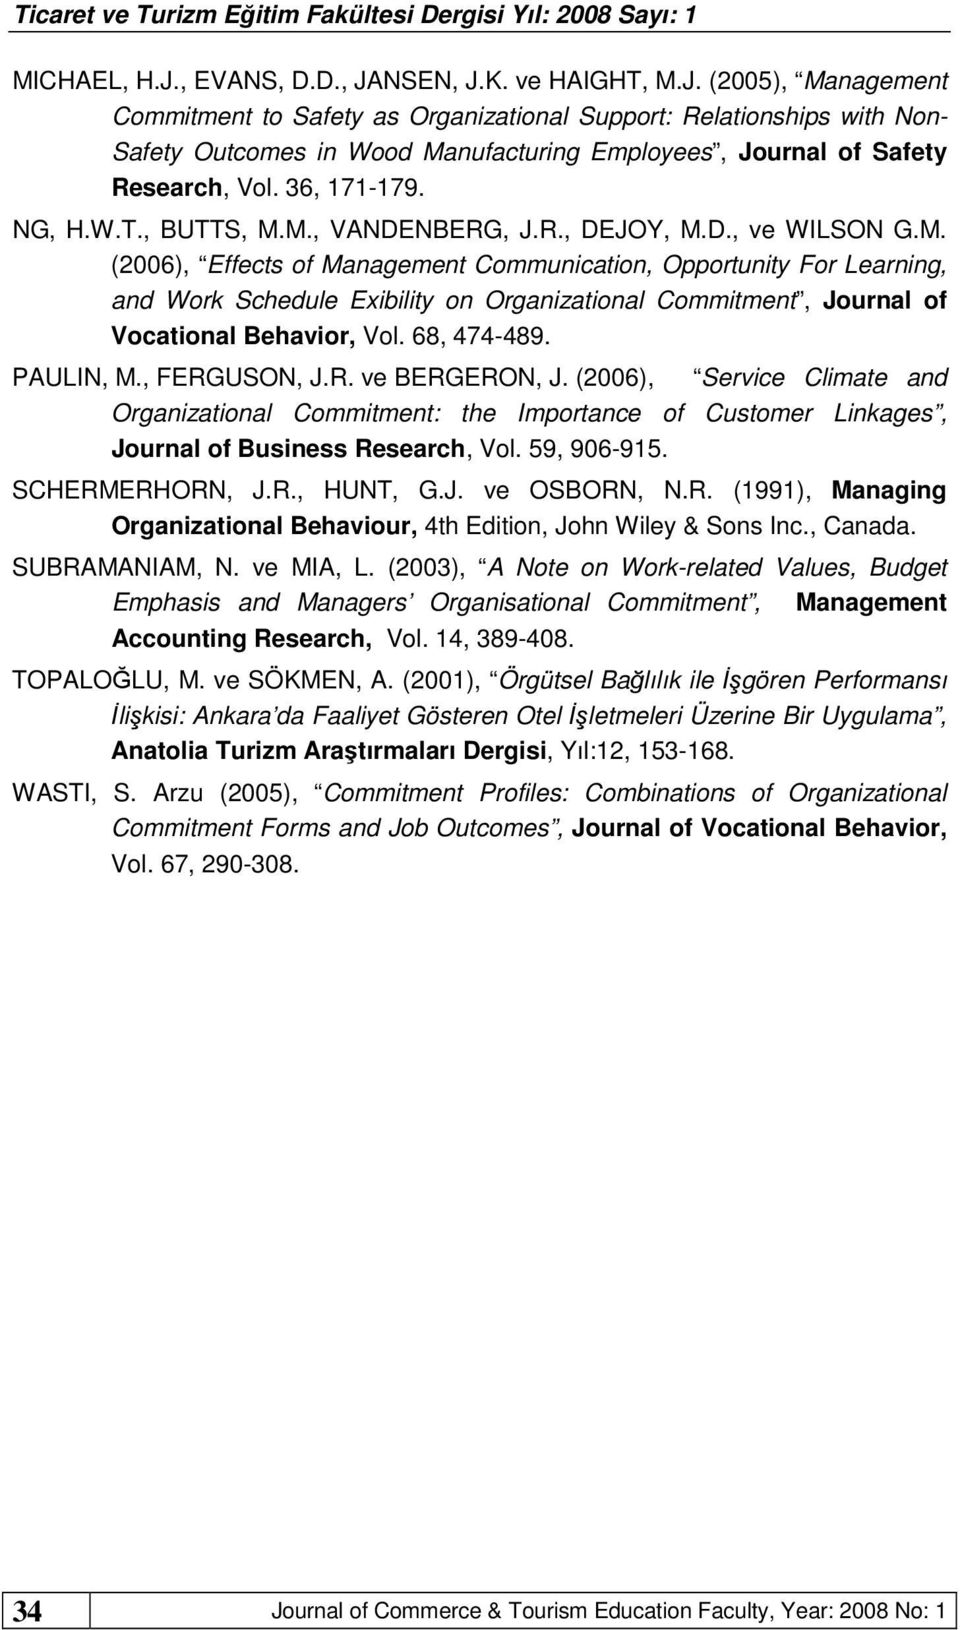 68, 474-489. PAULIN, M., FERGUSON, J.R. ve BERGERON, J. (2006), Service Climate and Organizational Commitment: the Importance of Customer Linkages, Journal of Business Research, Vol. 59, 906-915.